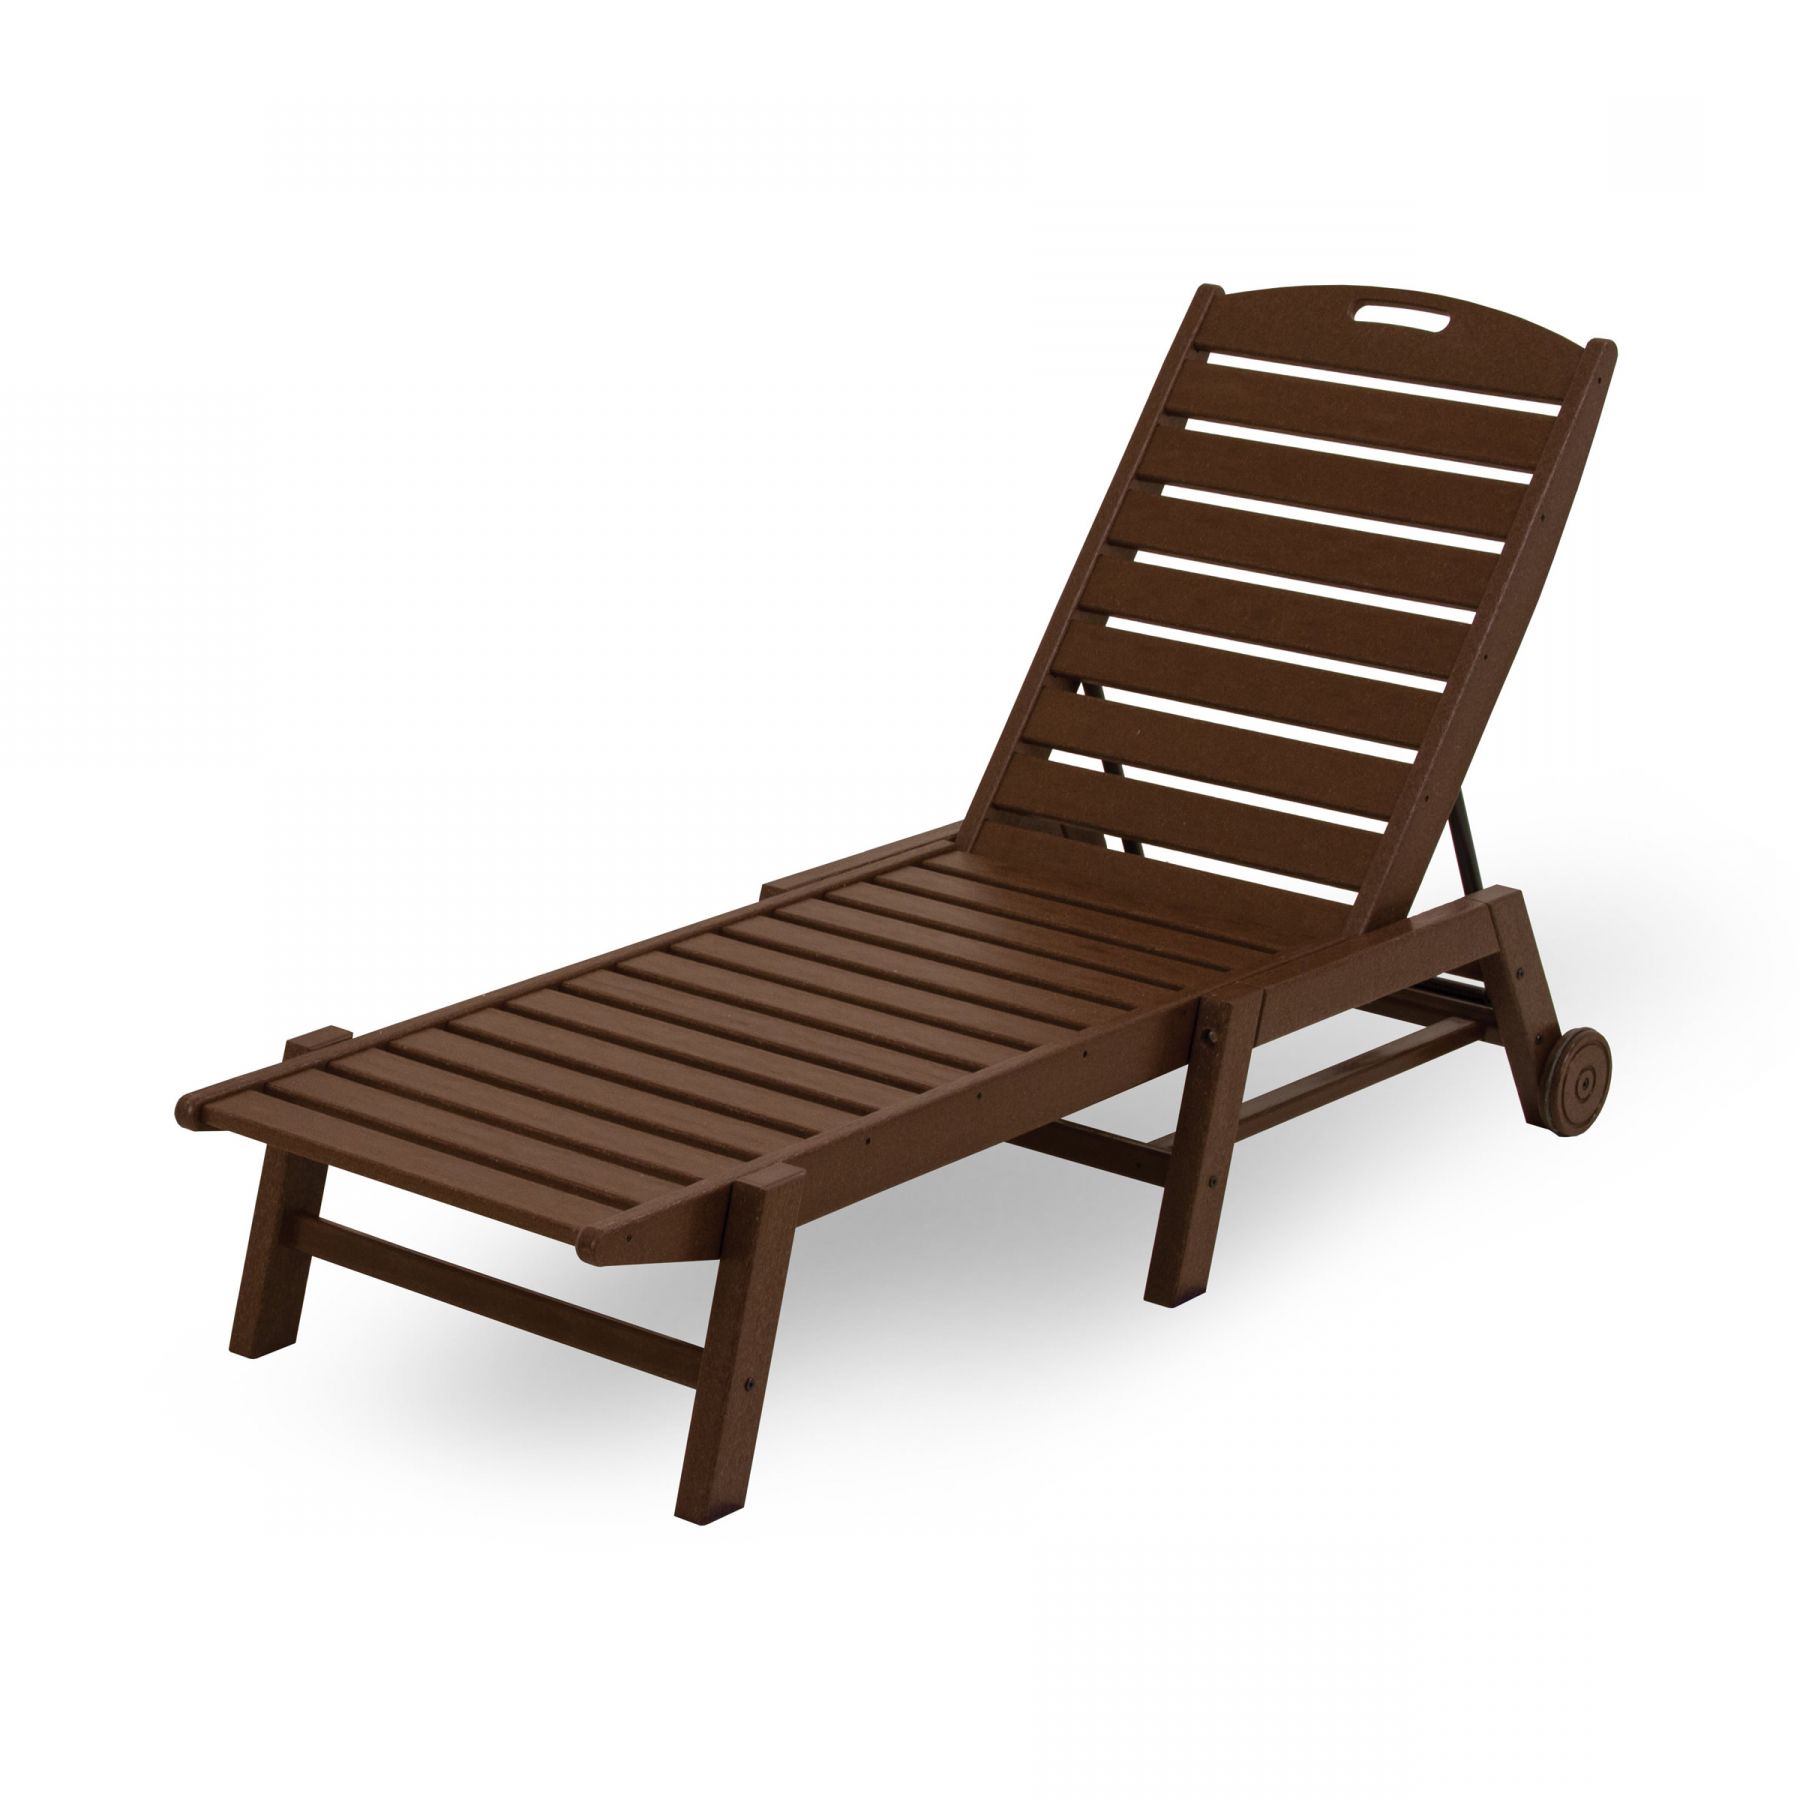 Trendy Polywood Nautical Wheeled Chaise Lounge Set Ashley Furniture With Nautical 3 Piece Outdoor Chaise Lounge Sets With Wheels And Table (View 23 of 25)